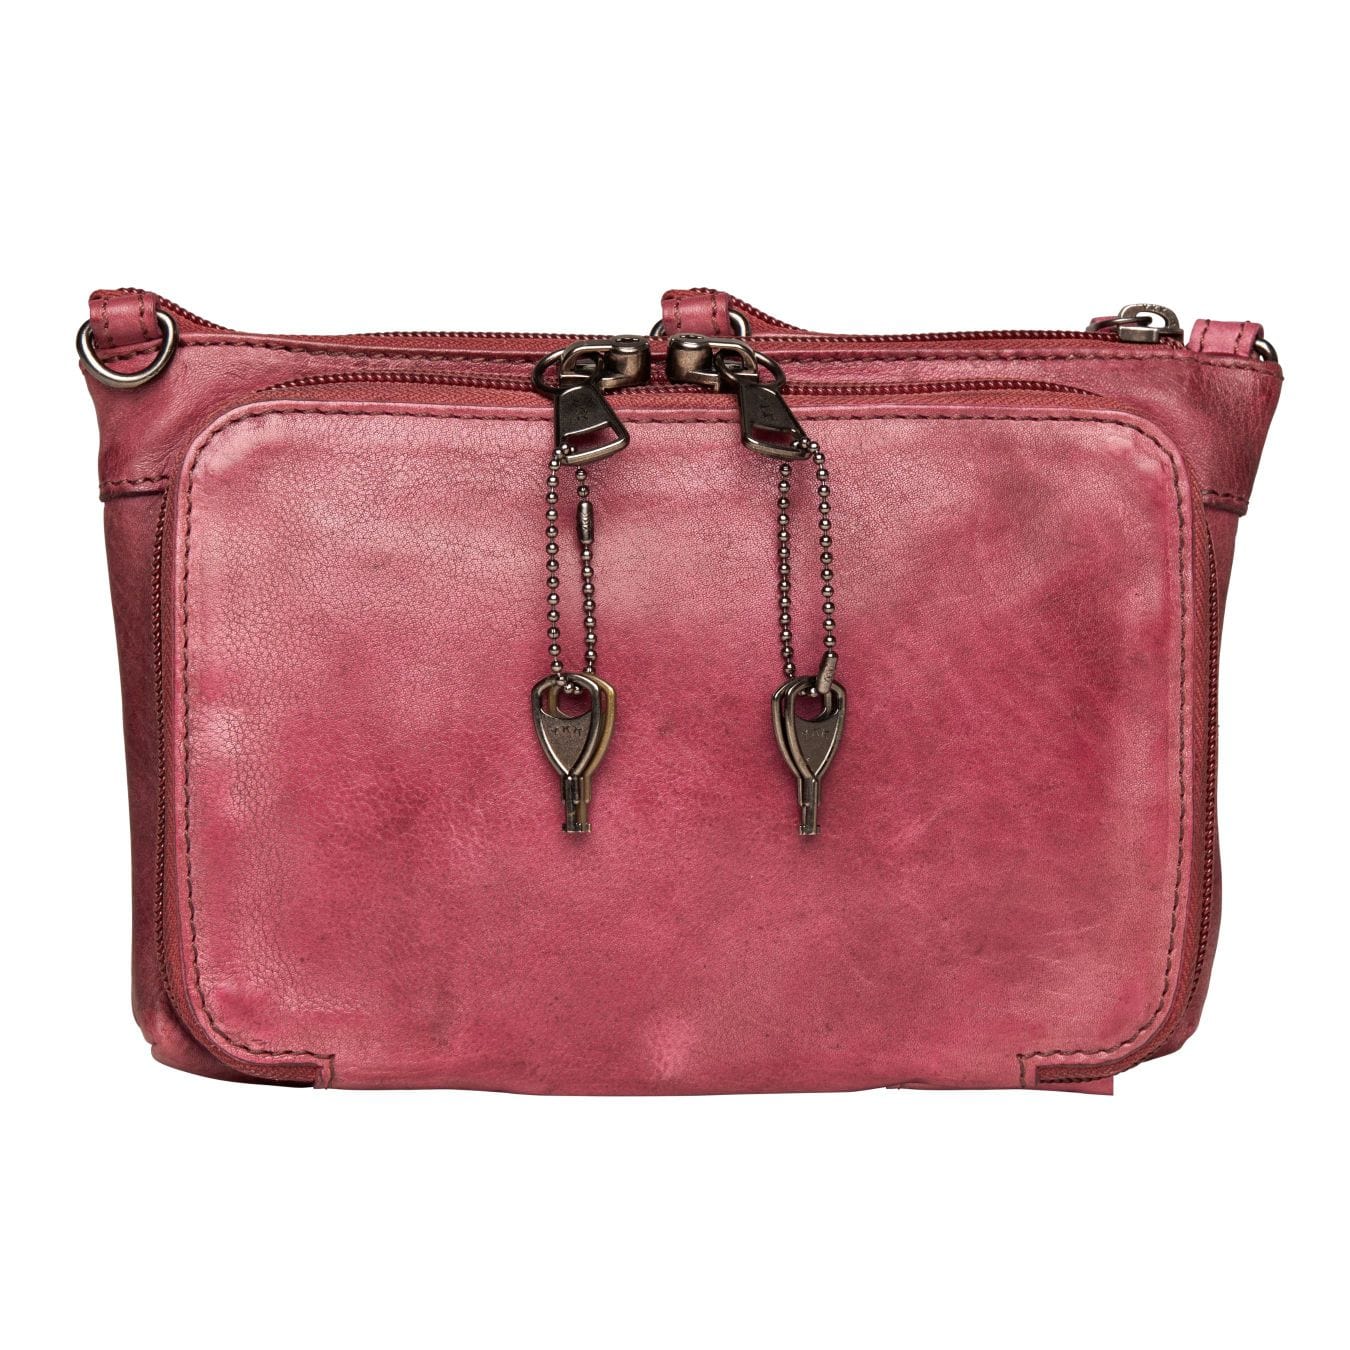 Concealed Carry Amelia Leather Crossbody